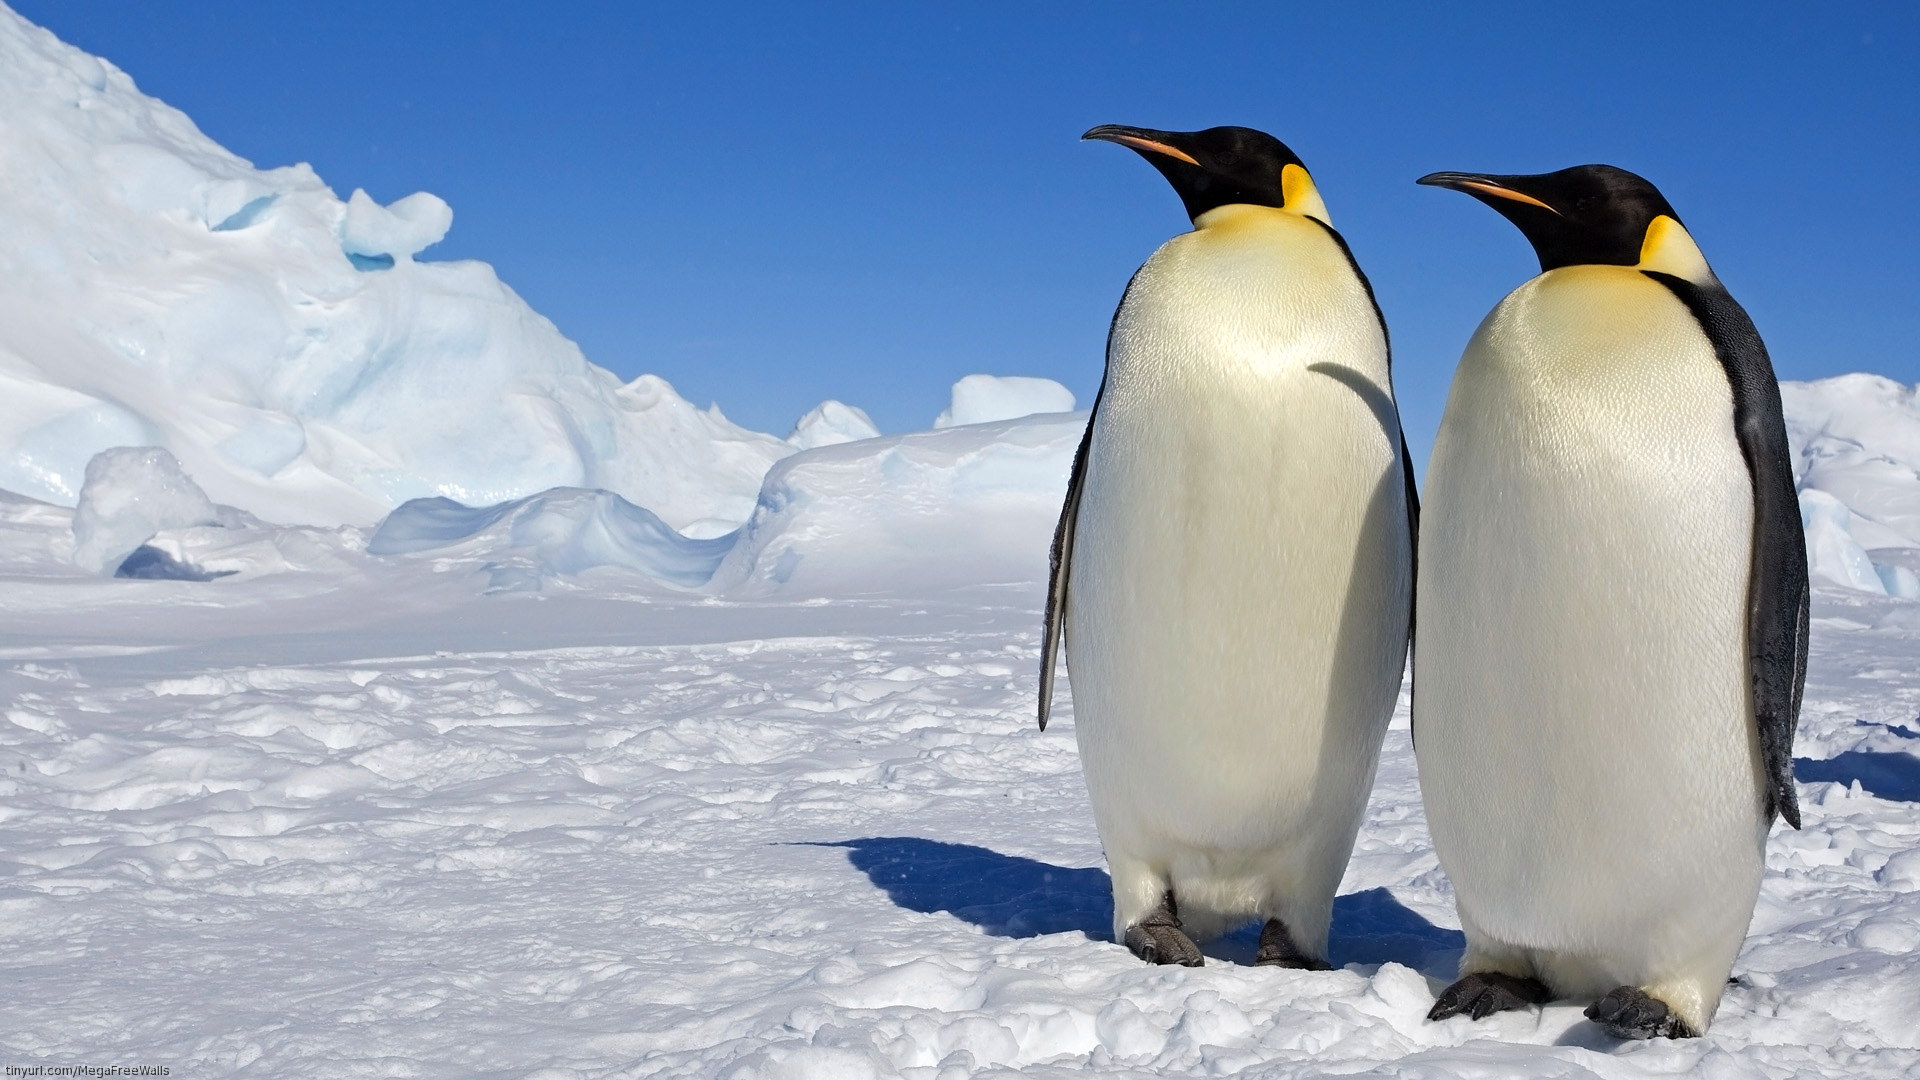 Movie March Of The Penguins HD Wallpaper | Background Image